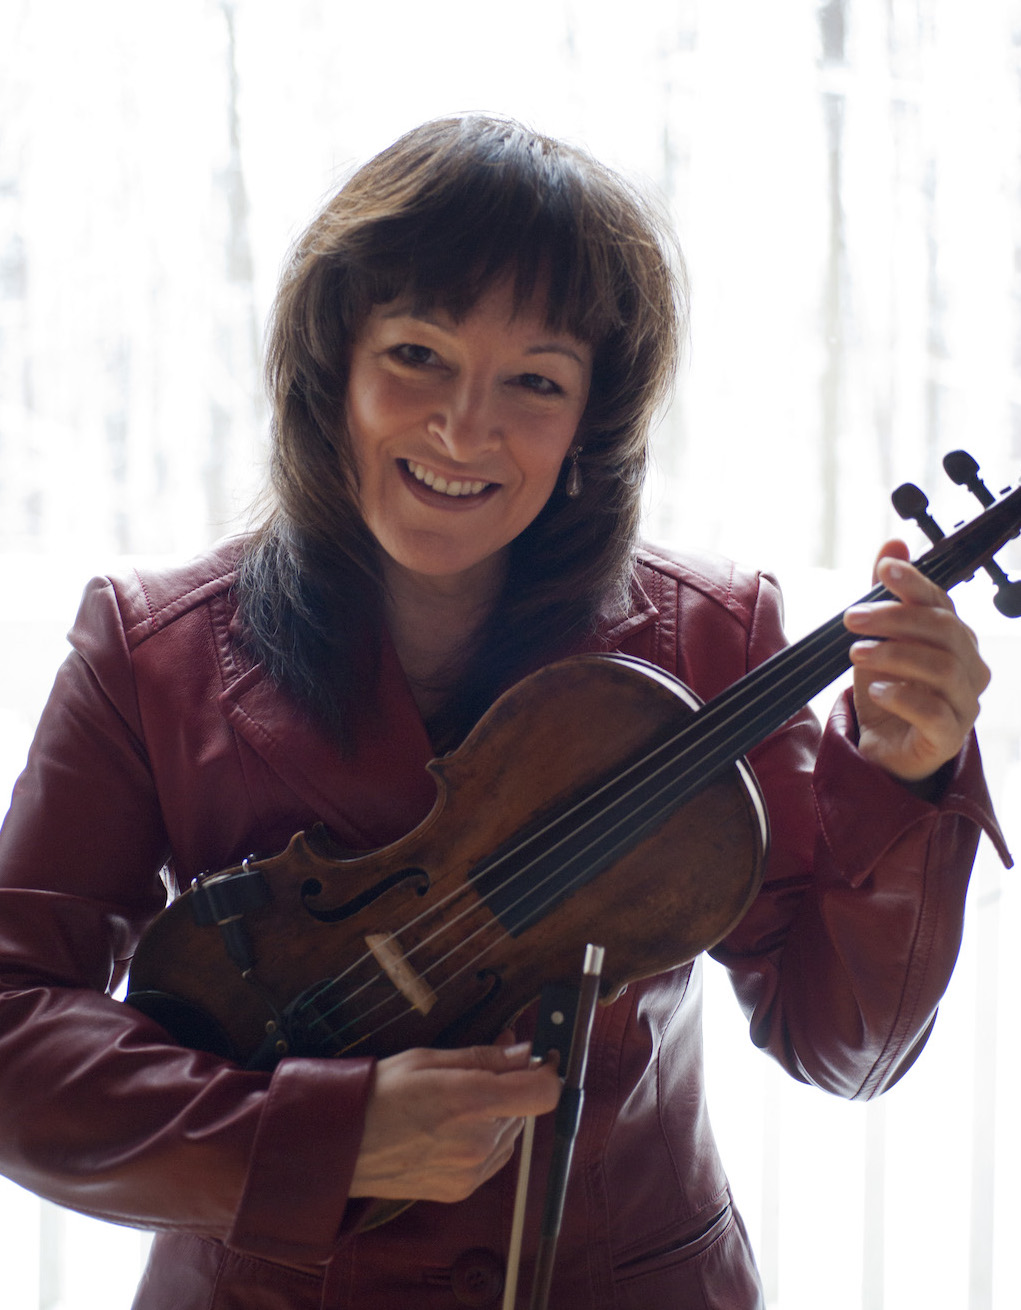 Cindy Thompson smiling and holding her fiddle and bow wearing a fancy red leather jacket.